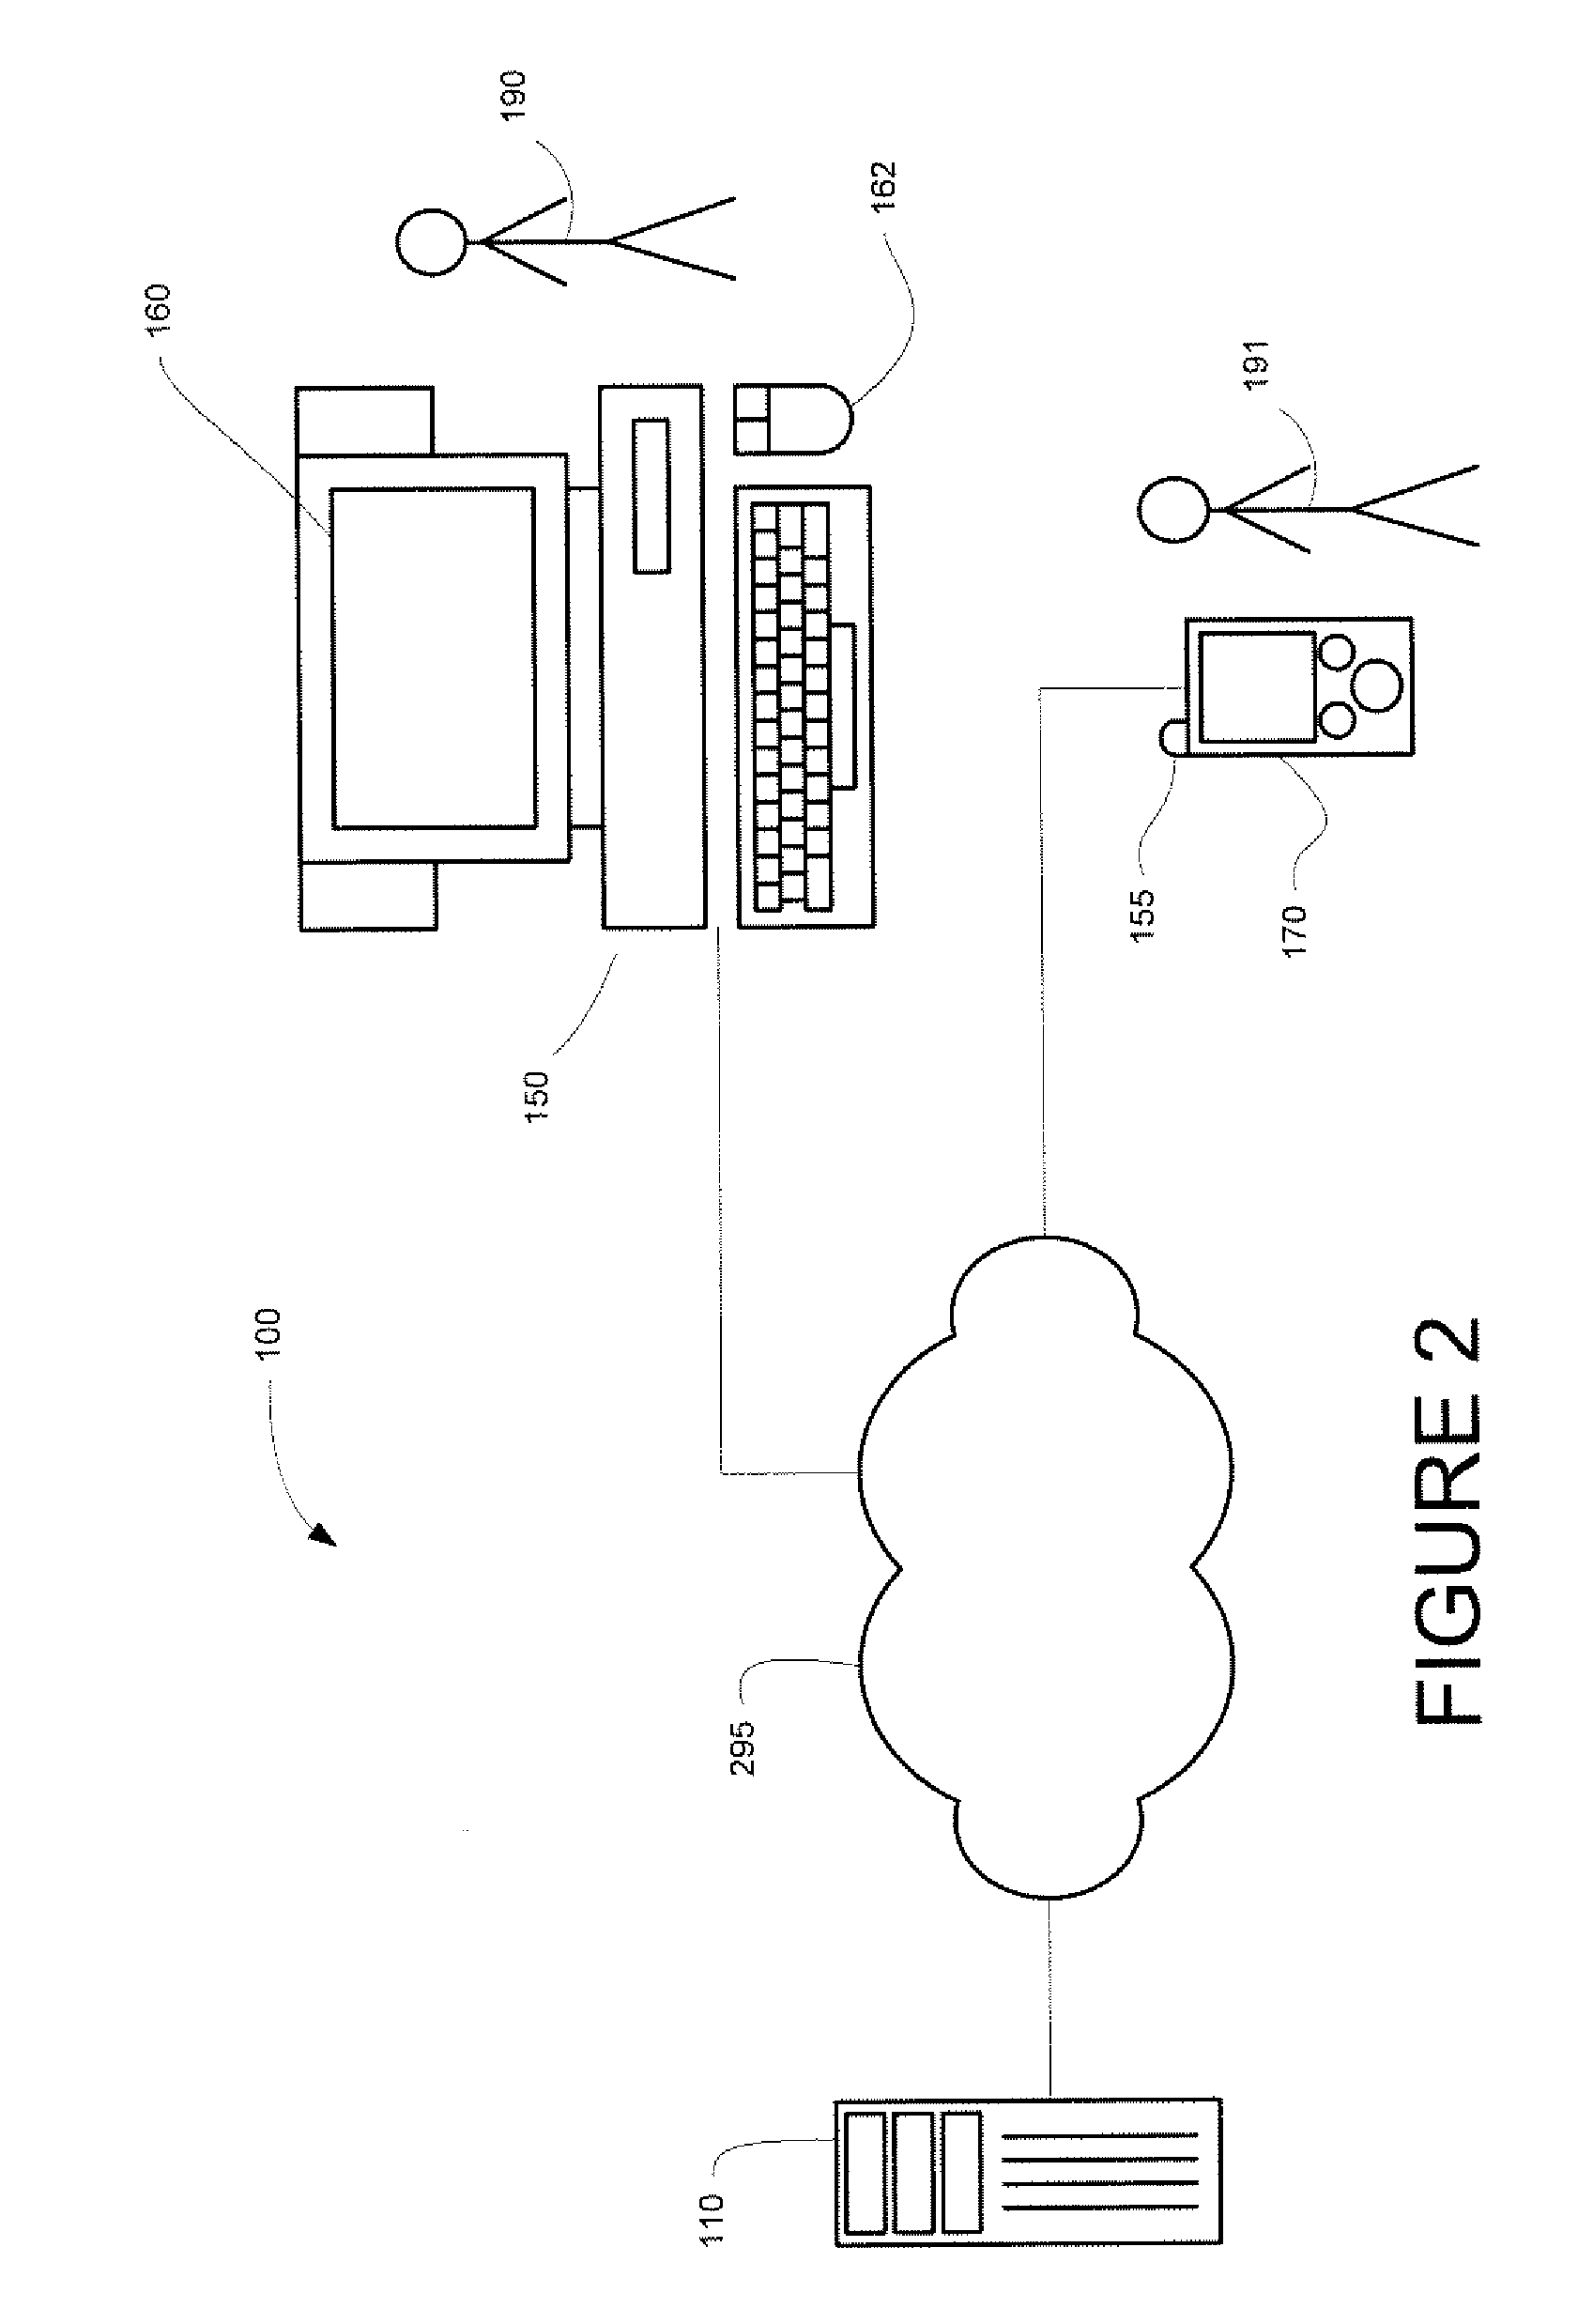 System and method of indicating transition between street level images